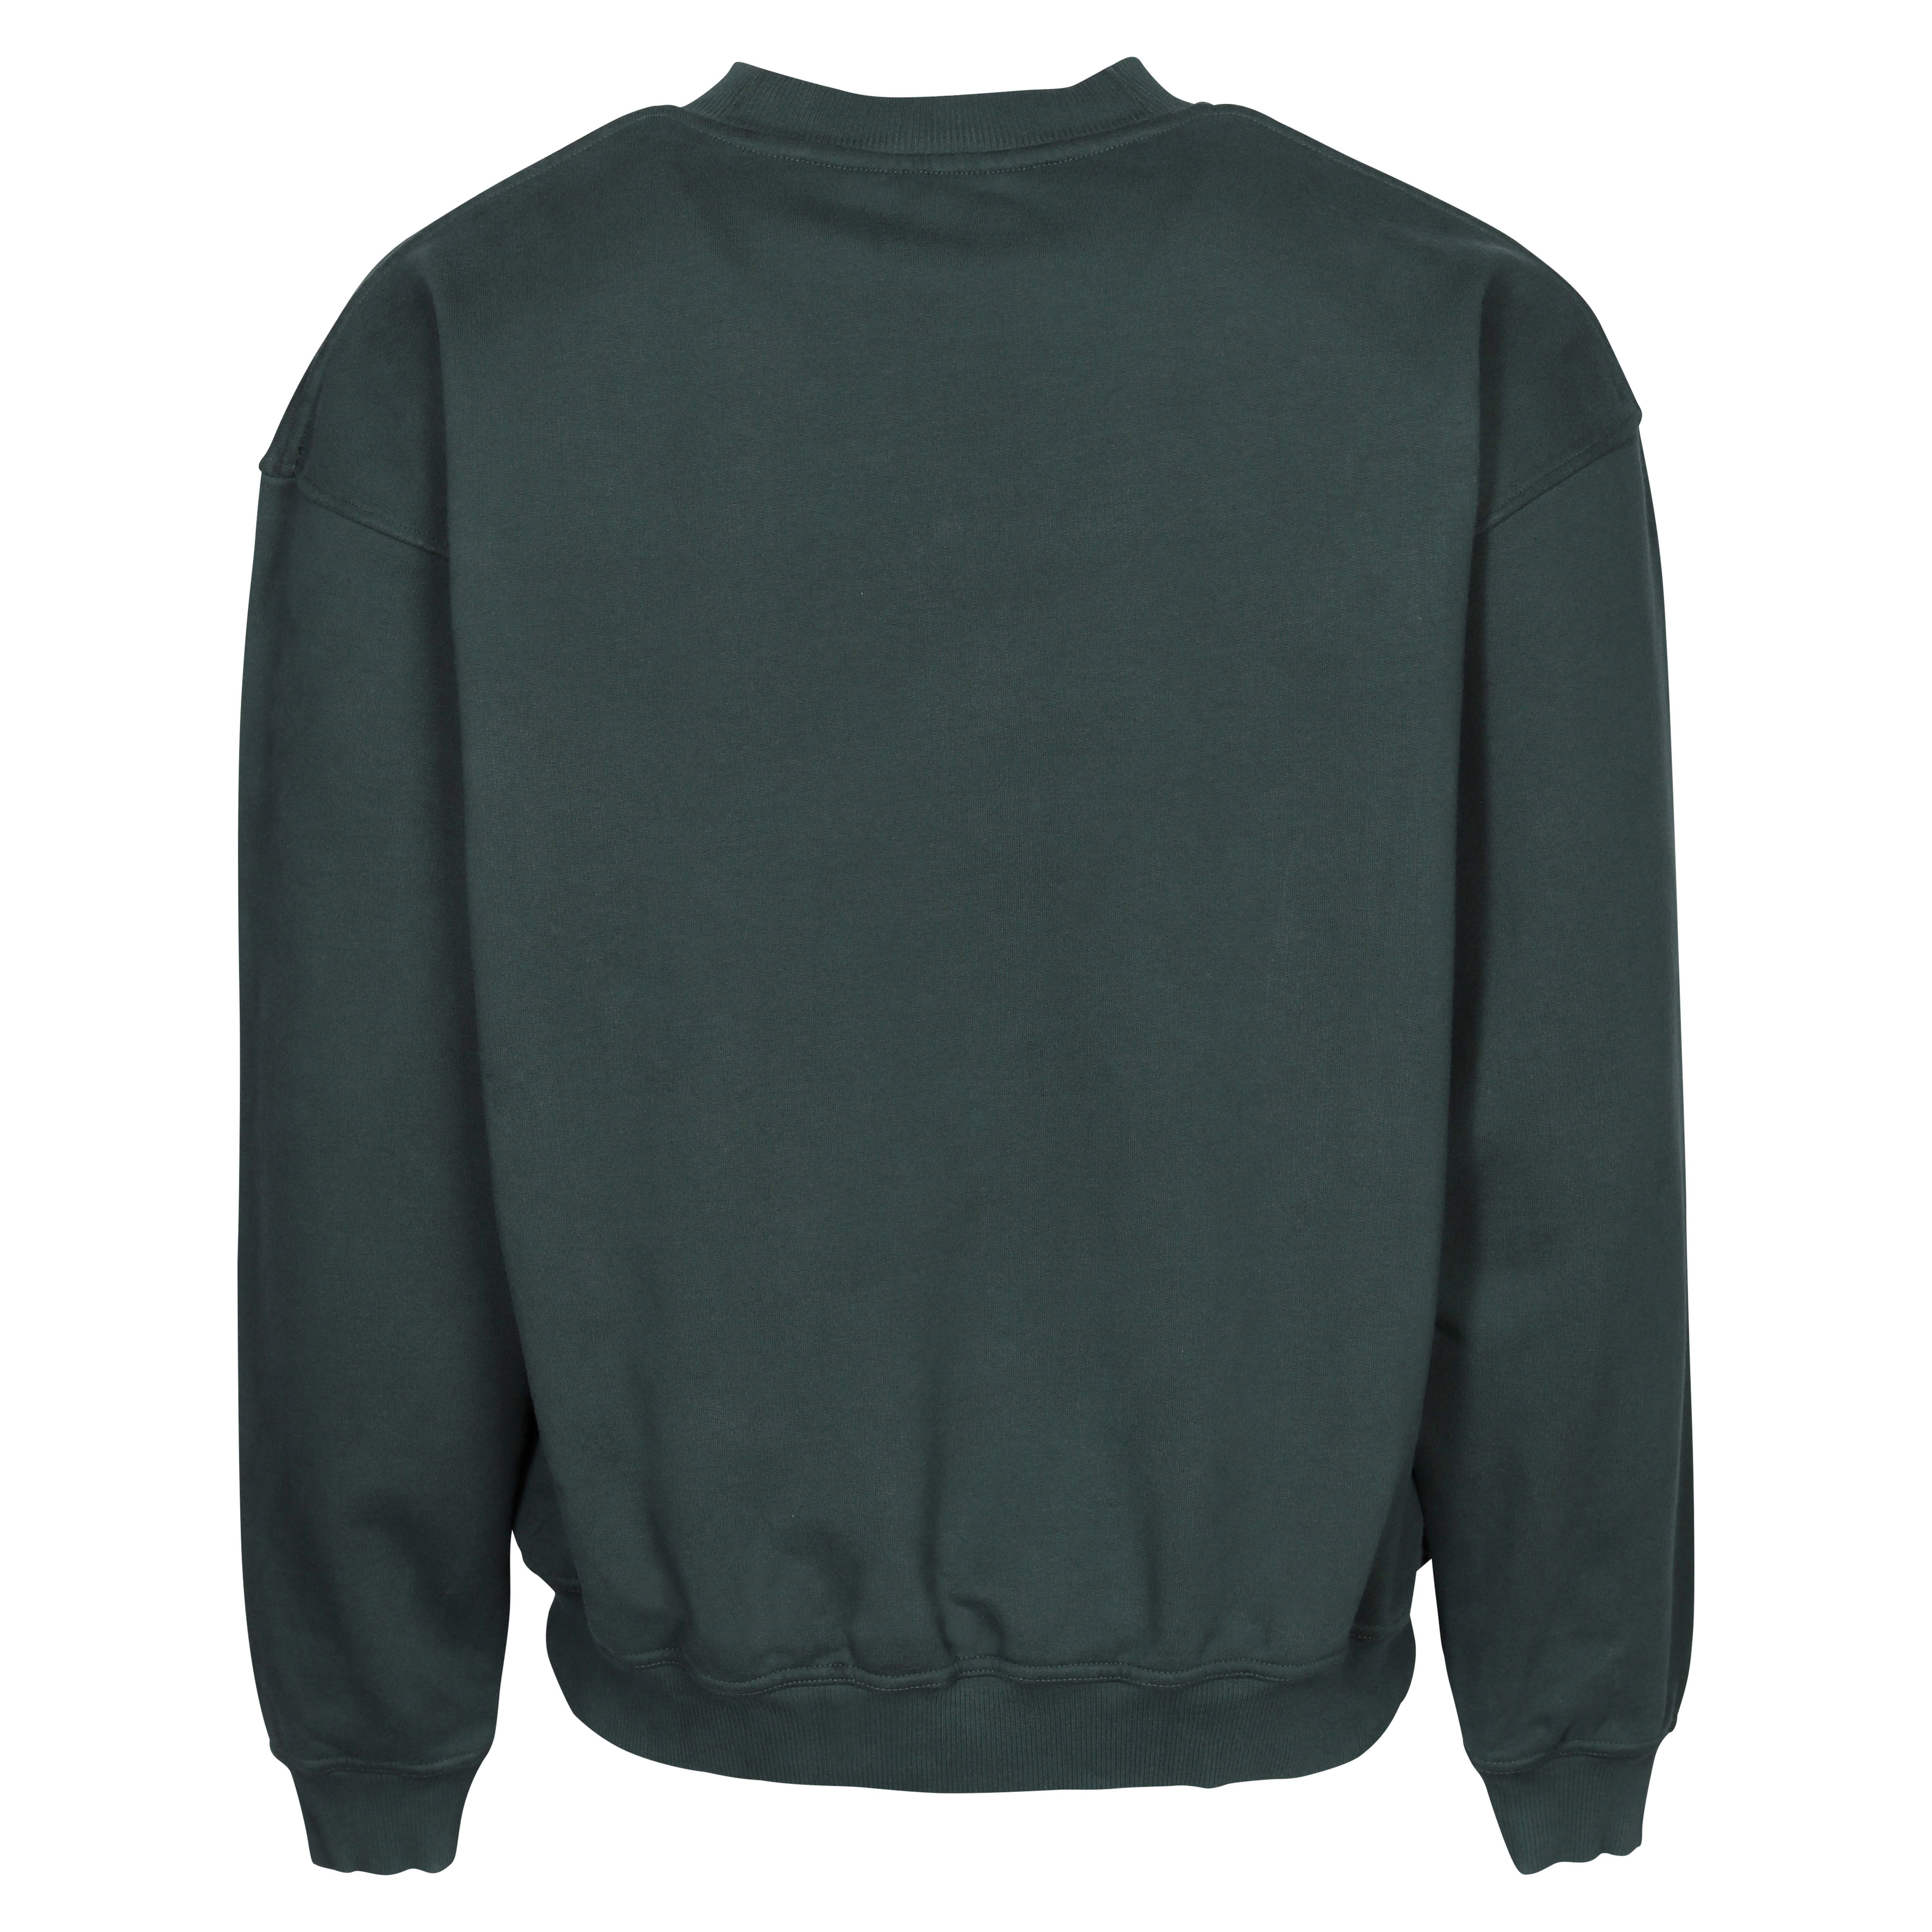 Represent Blank Sweater in Vintage Green